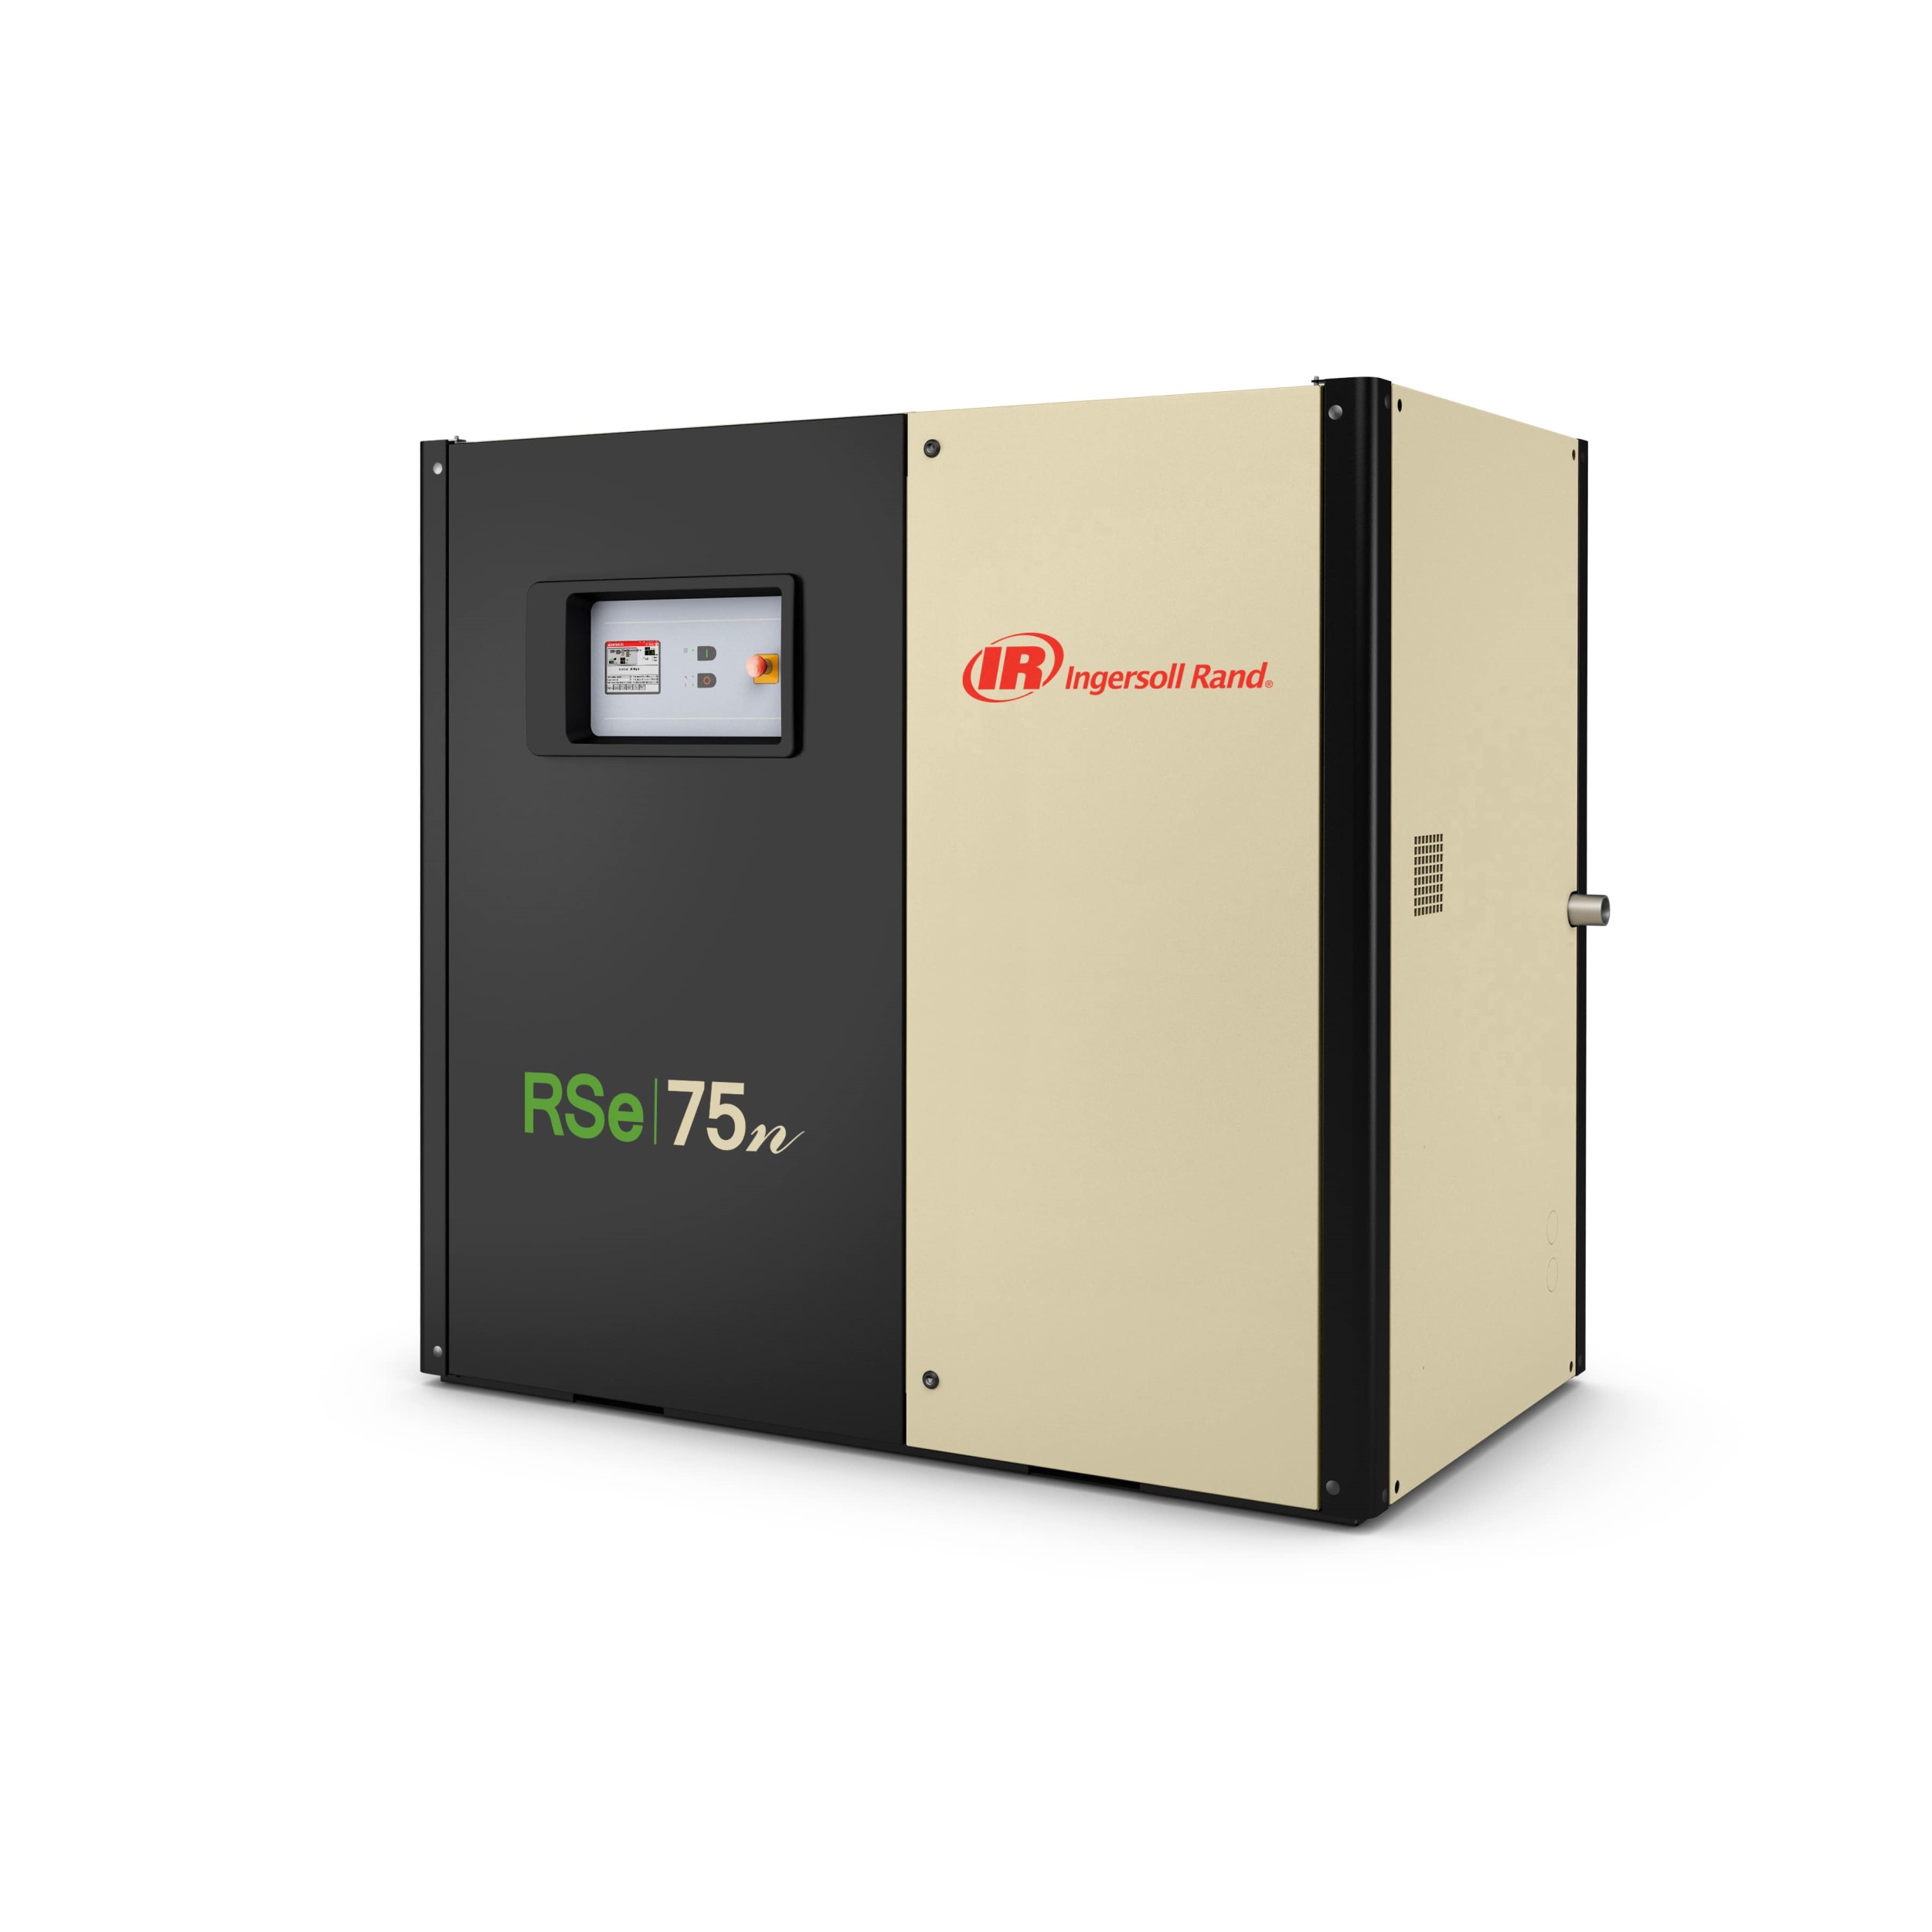 55 75 kW Oil Flooded VSD Rotary Screw Compressors